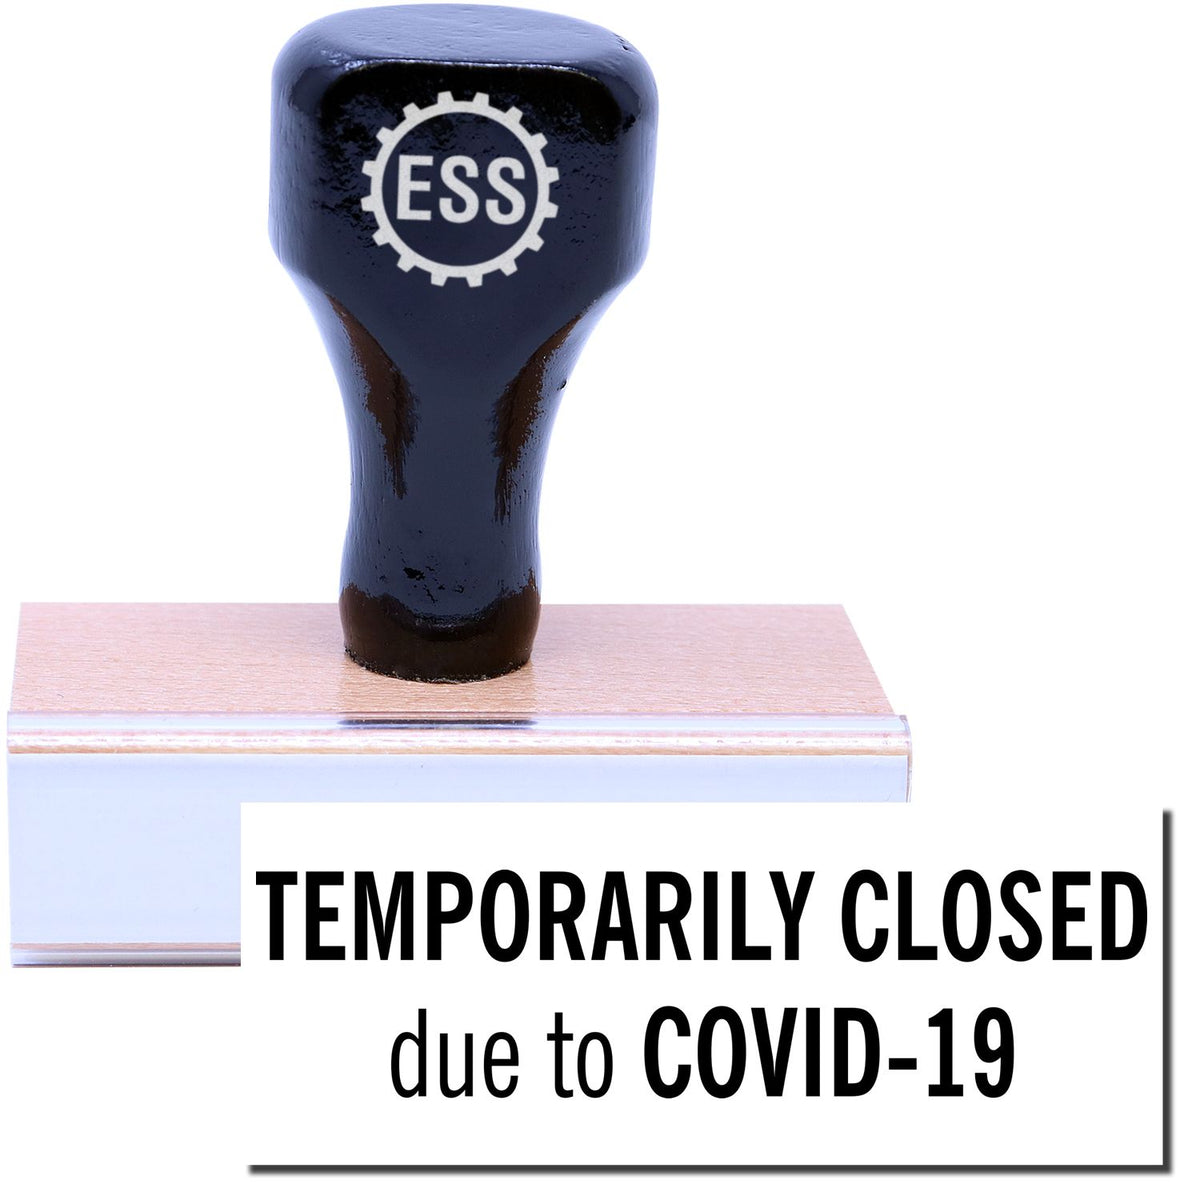 A stock office rubber stamp with a stamped image showing how the text &quot;TEMPORARILY CLOSED due to COVID-19&quot; in a large font is displayed after stamping.